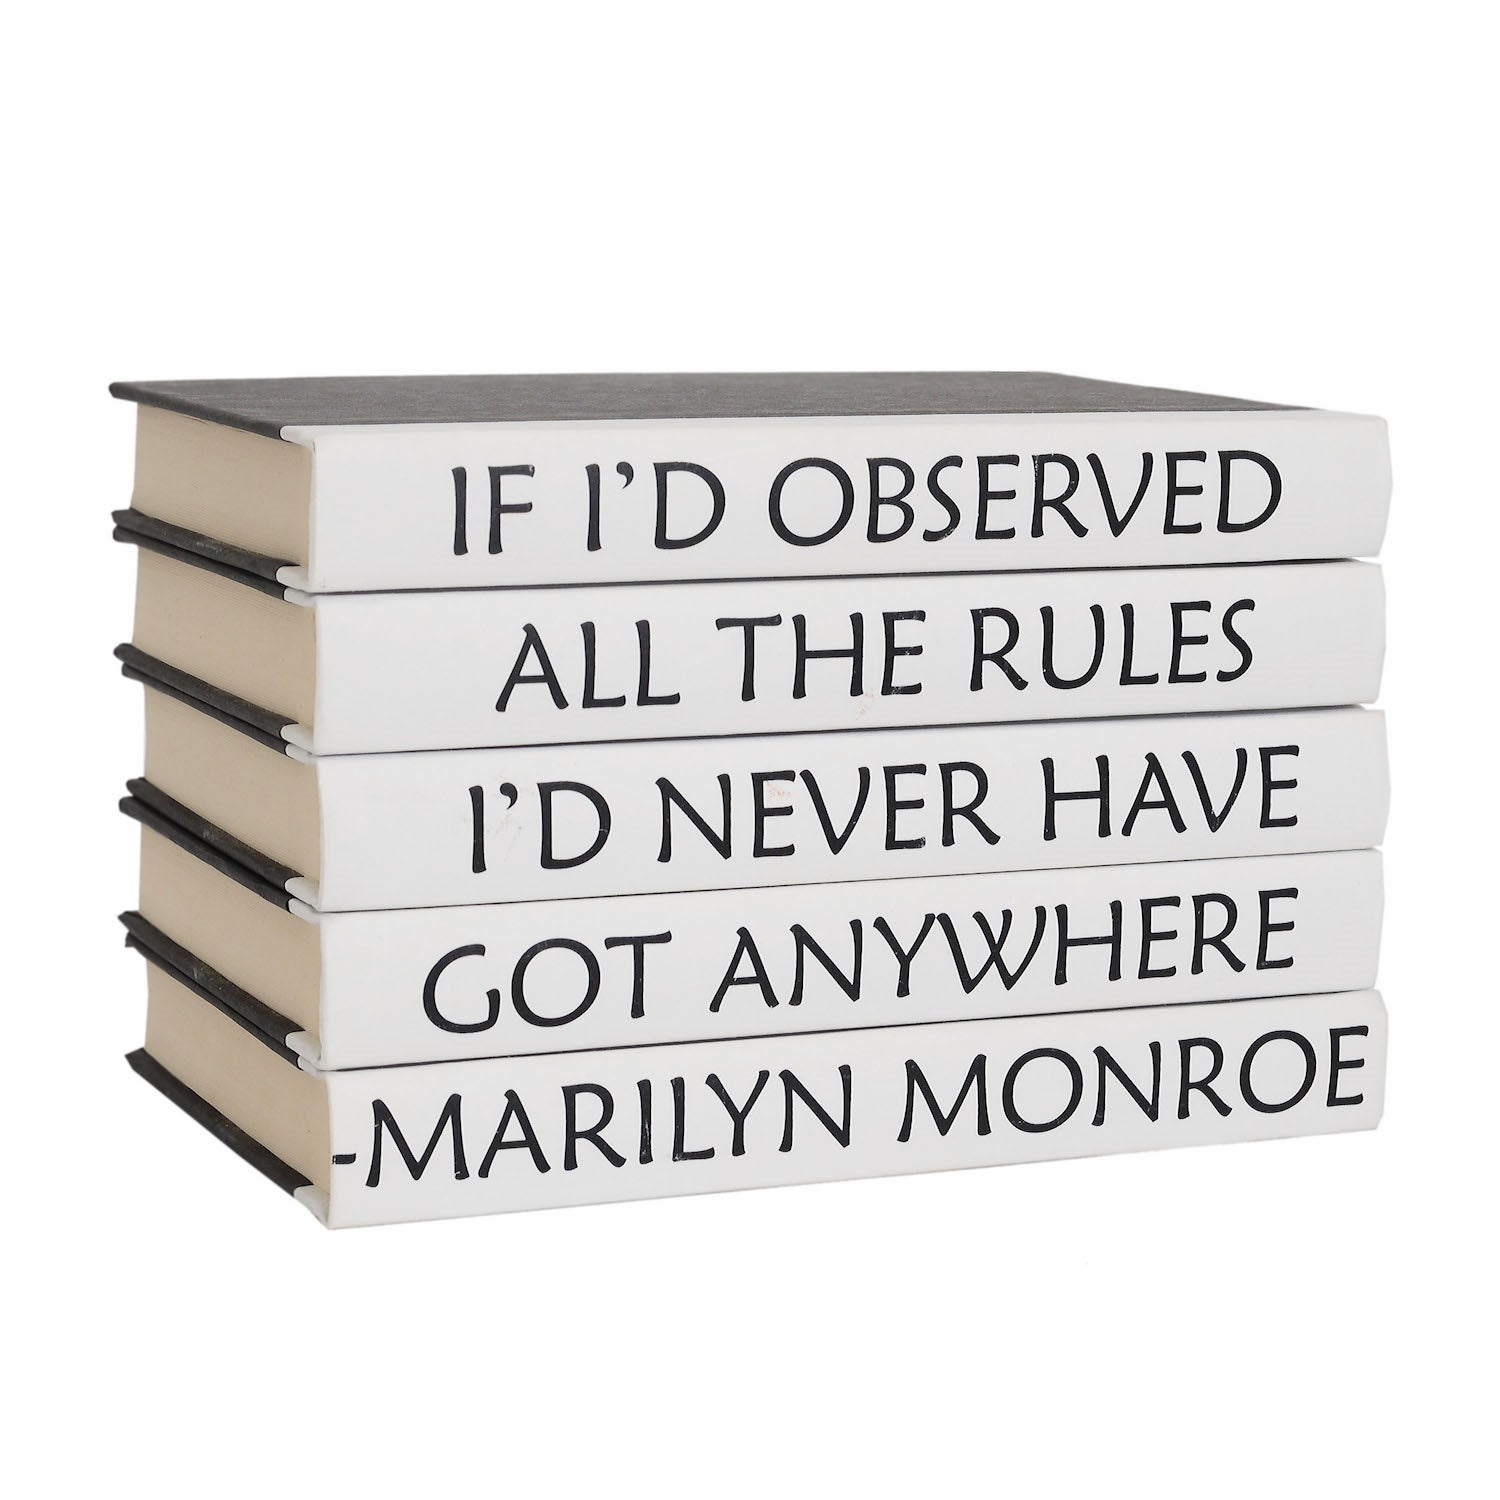 Marilyn Monroe - Quote Book Set- Never Got Anywhere Quote